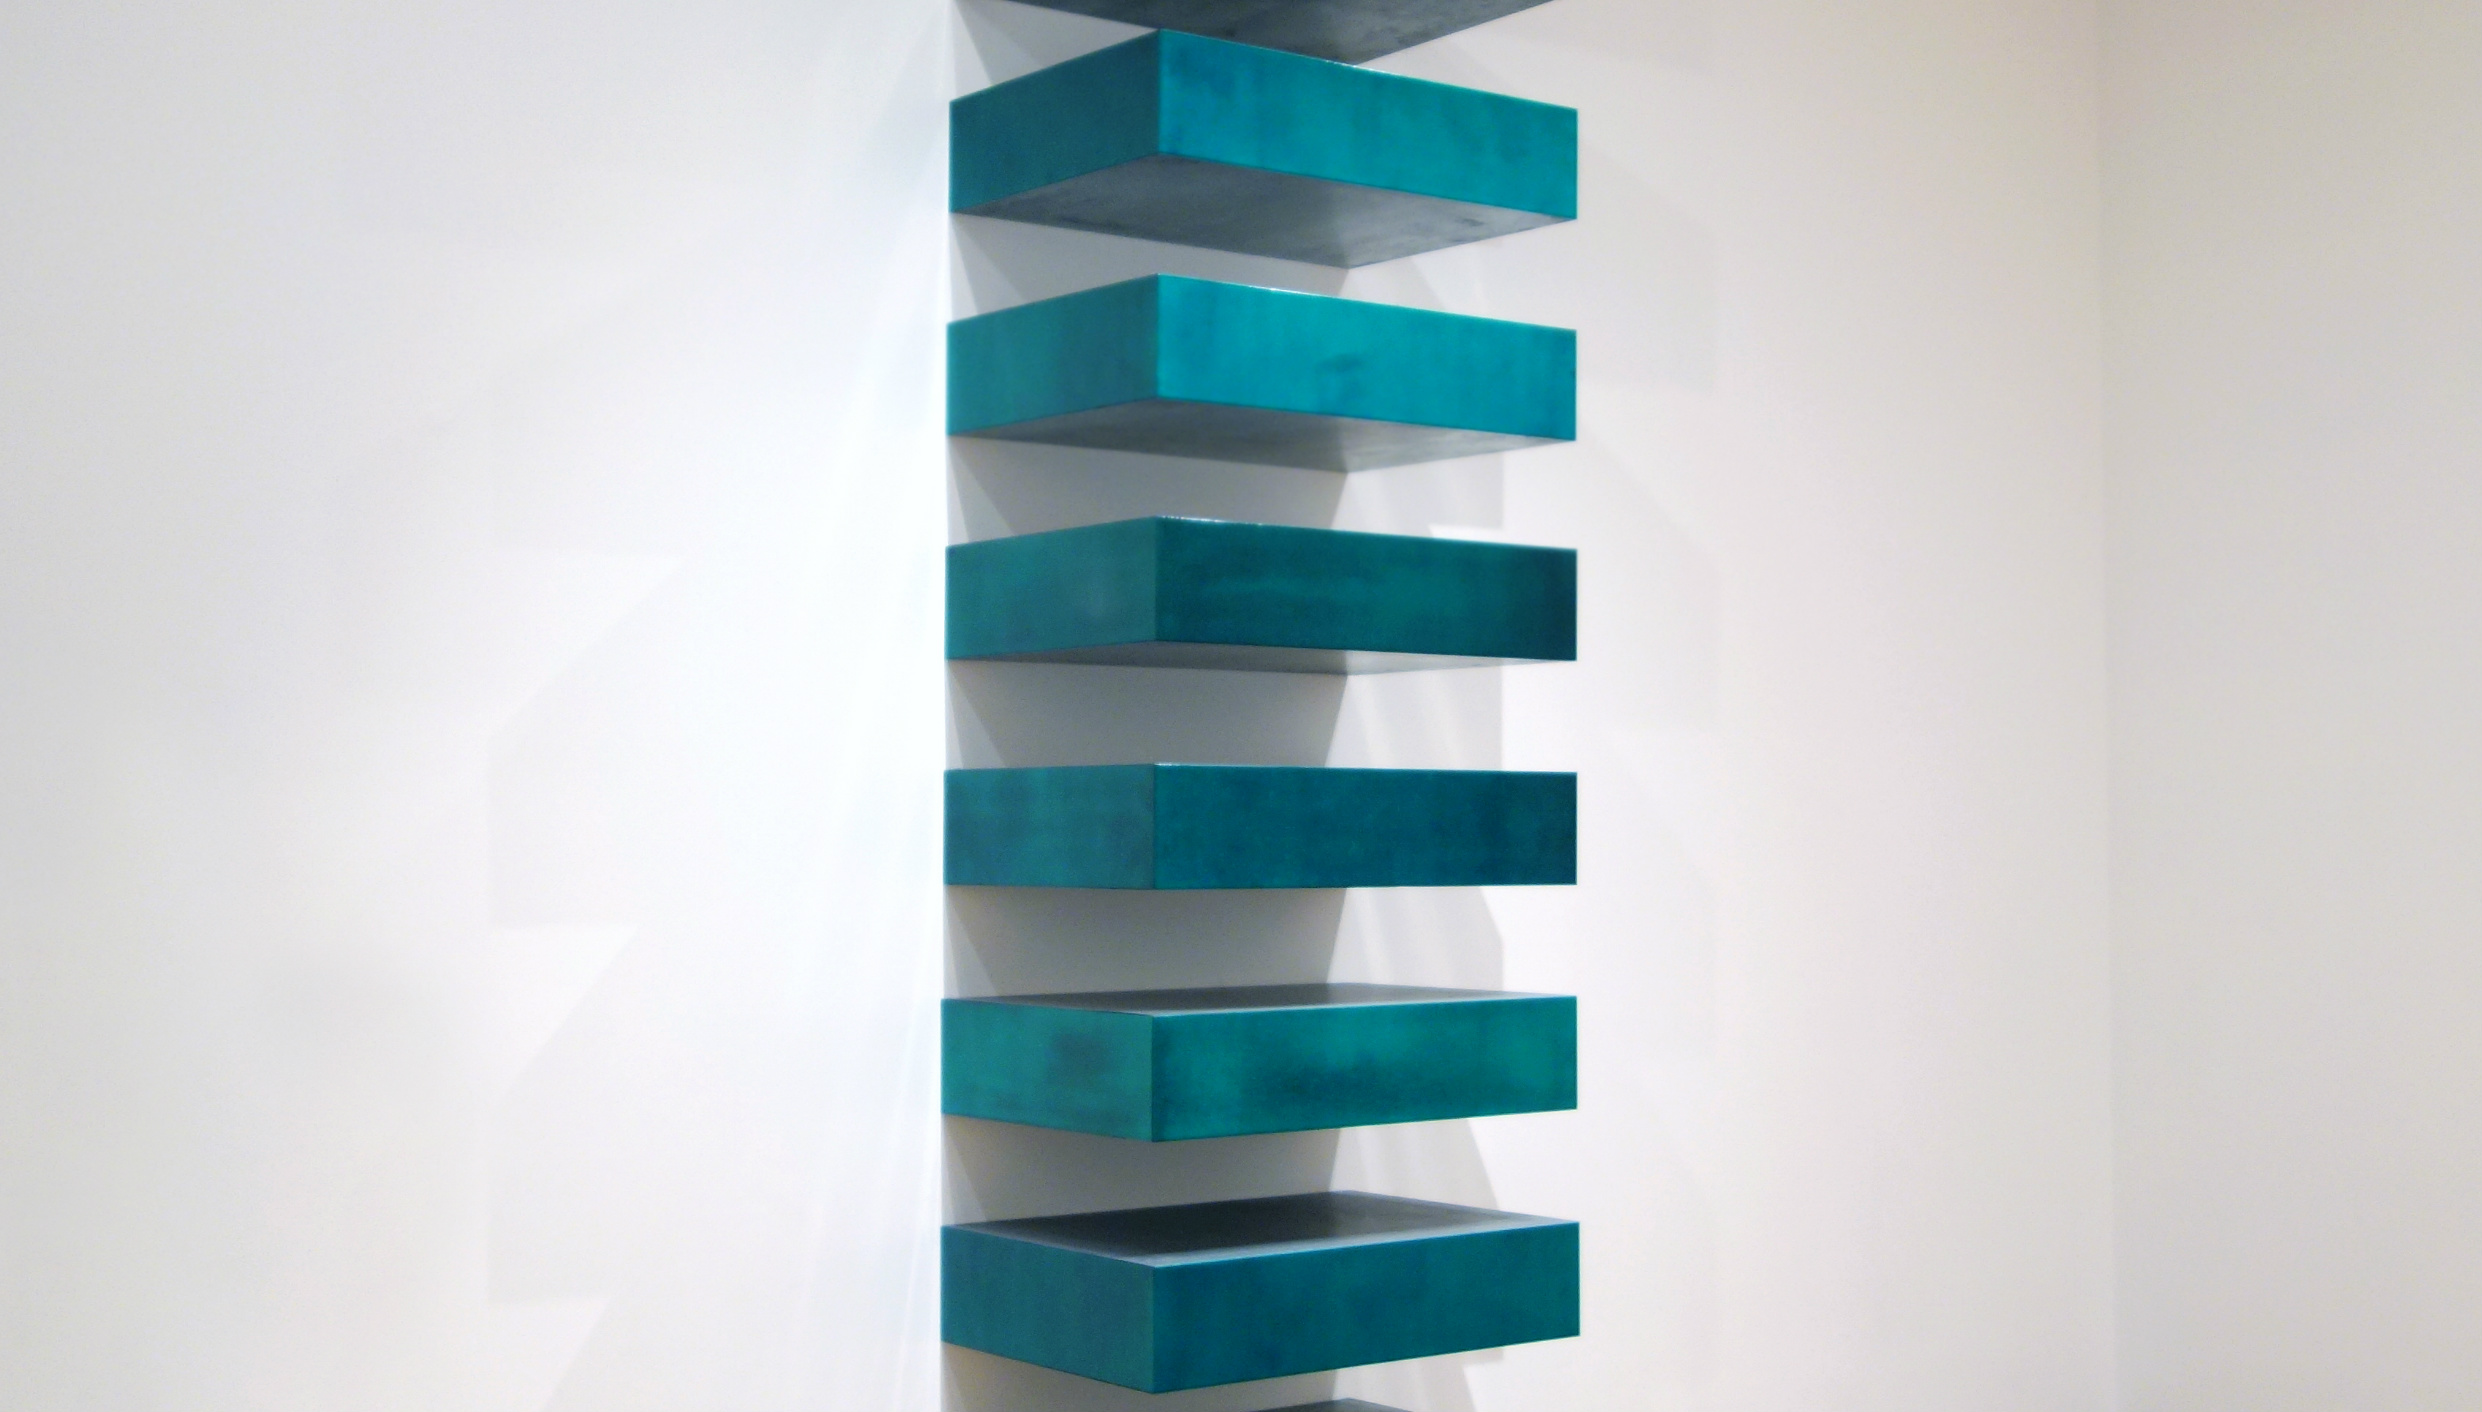 Donald Judd, Untitled (Stack), 1967, lacquer on galvanized iron, twelve units, each 22.8 x 101.6 x 78.7 cm, installed vertically with 9" (22.8 cm) intervals (MoMA)